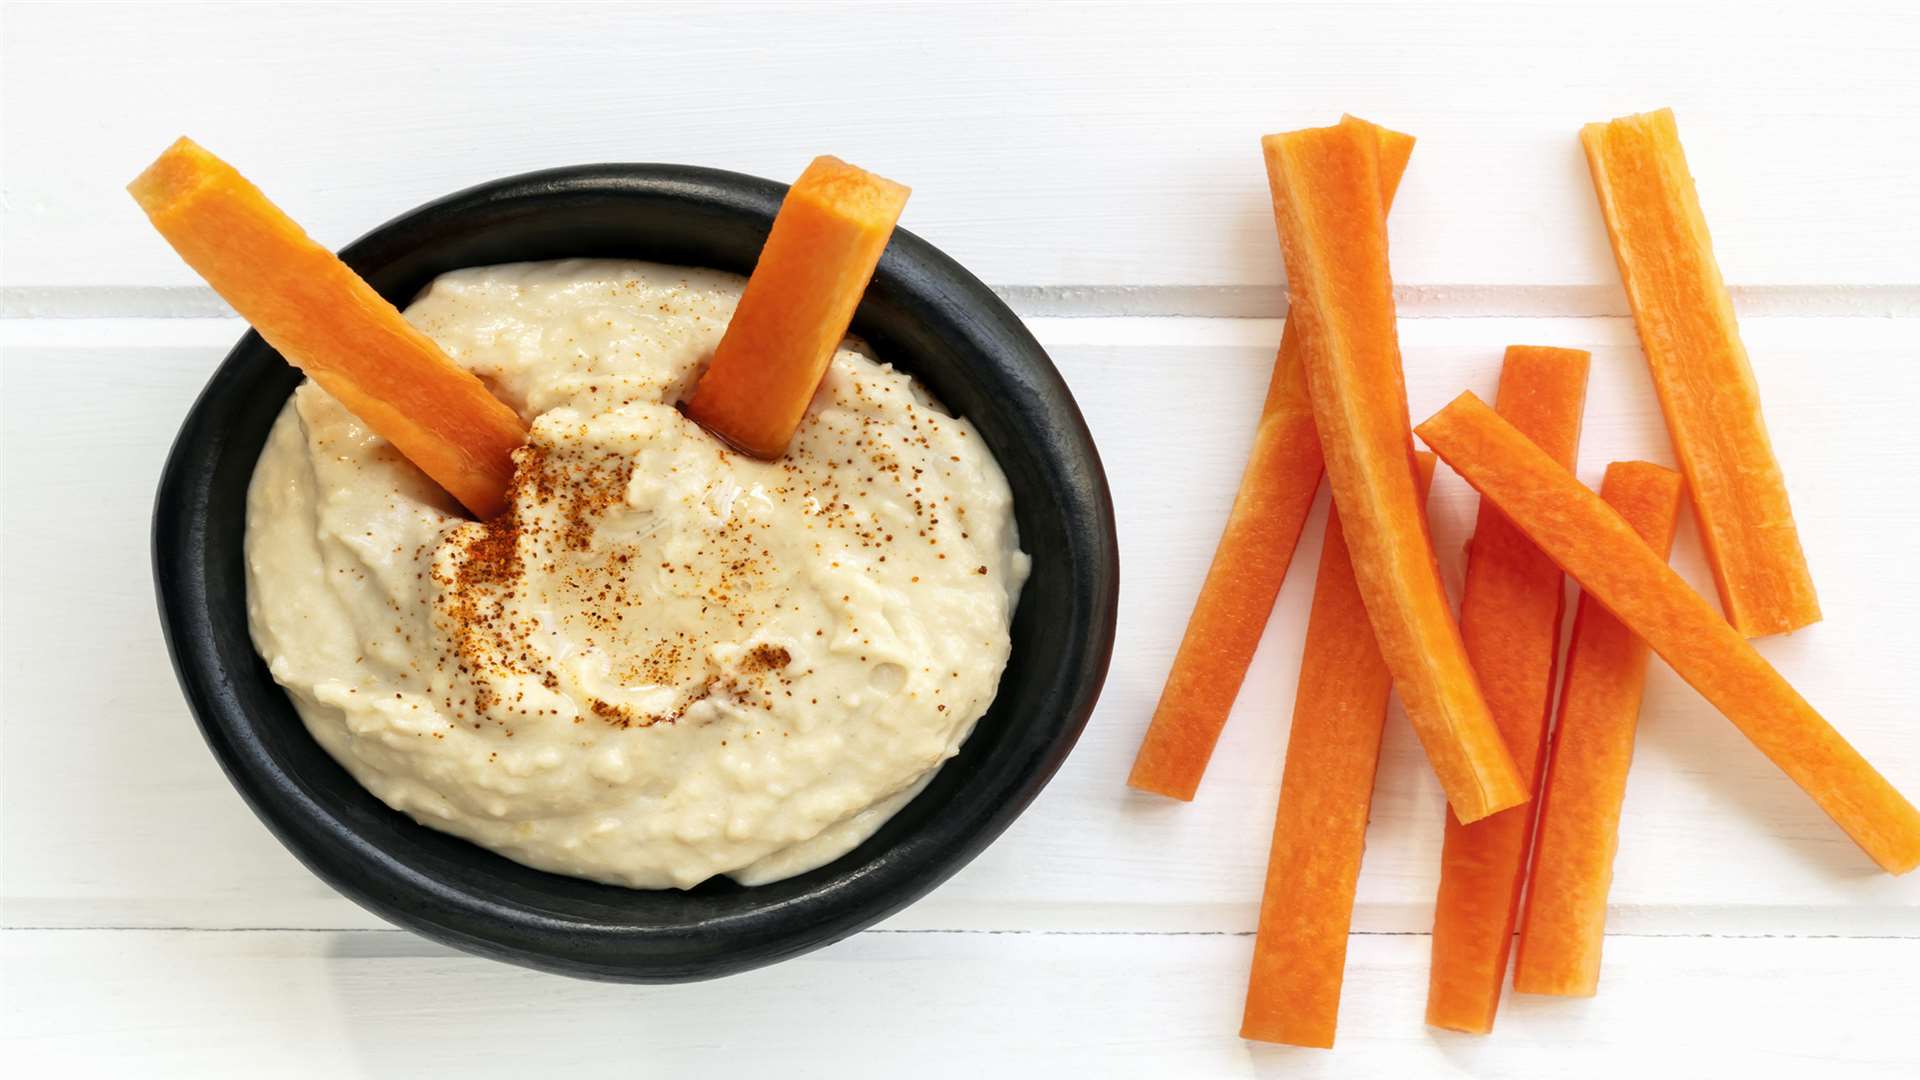 Carrot sticks with hummus make a healthy snack